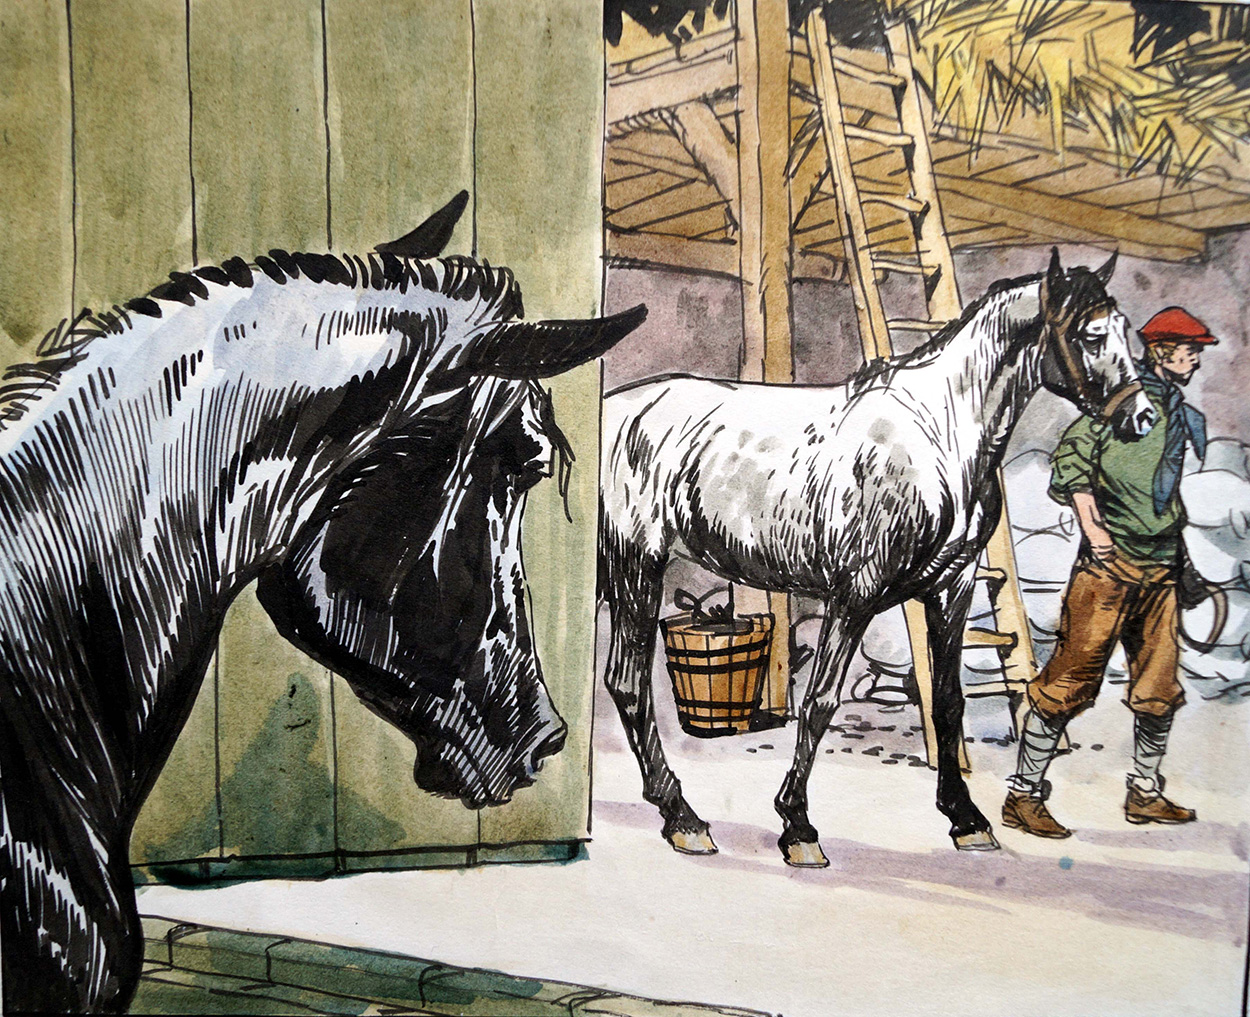 Black Beauty - In The Stable (Original) art by Black Beauty (Carlos Roume) Art at The Illustration Art Gallery